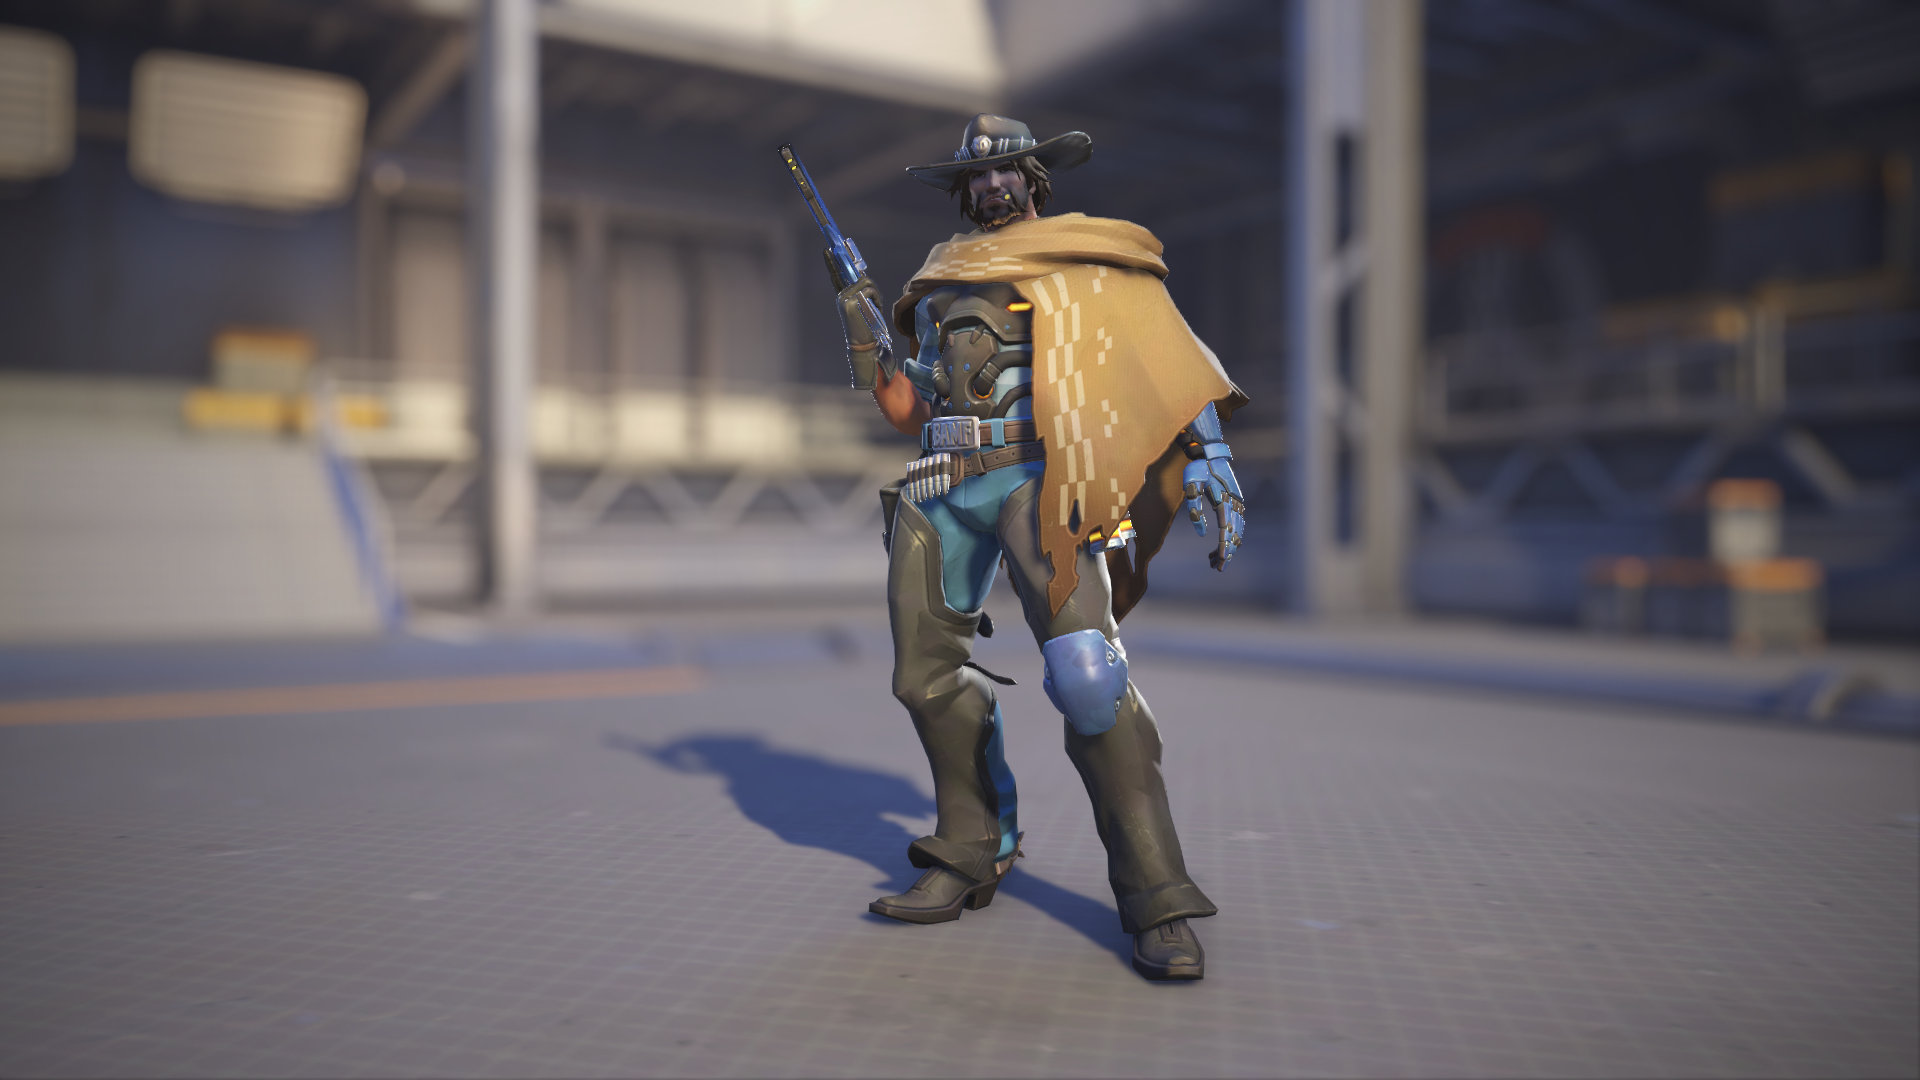 Cassidy models his On The Range skin in Overwatch 2.